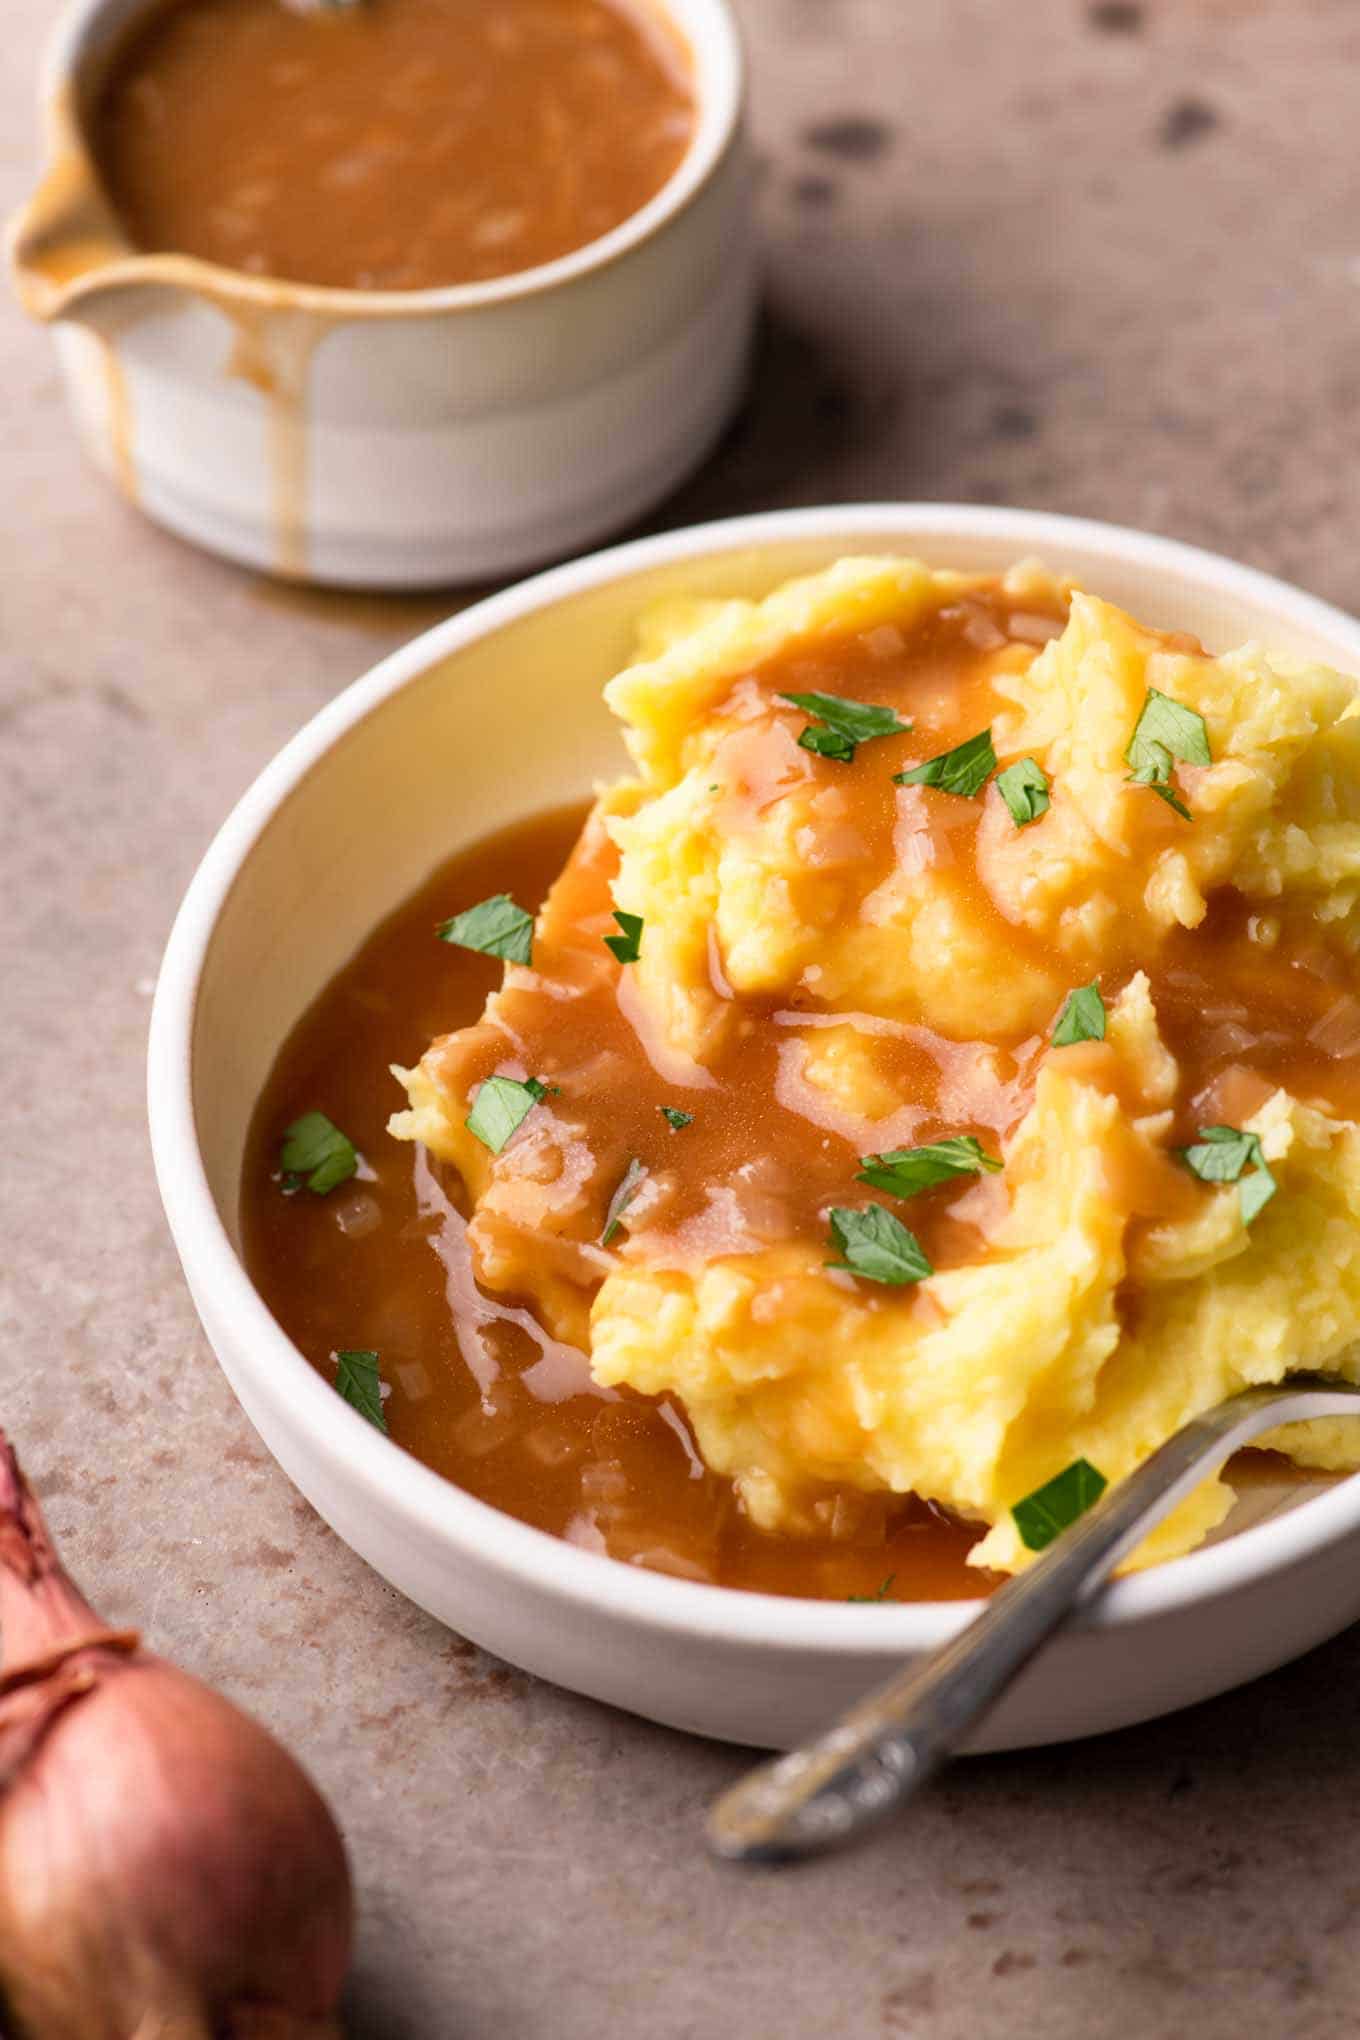 mashed potatoes in a bowl topped with gravy